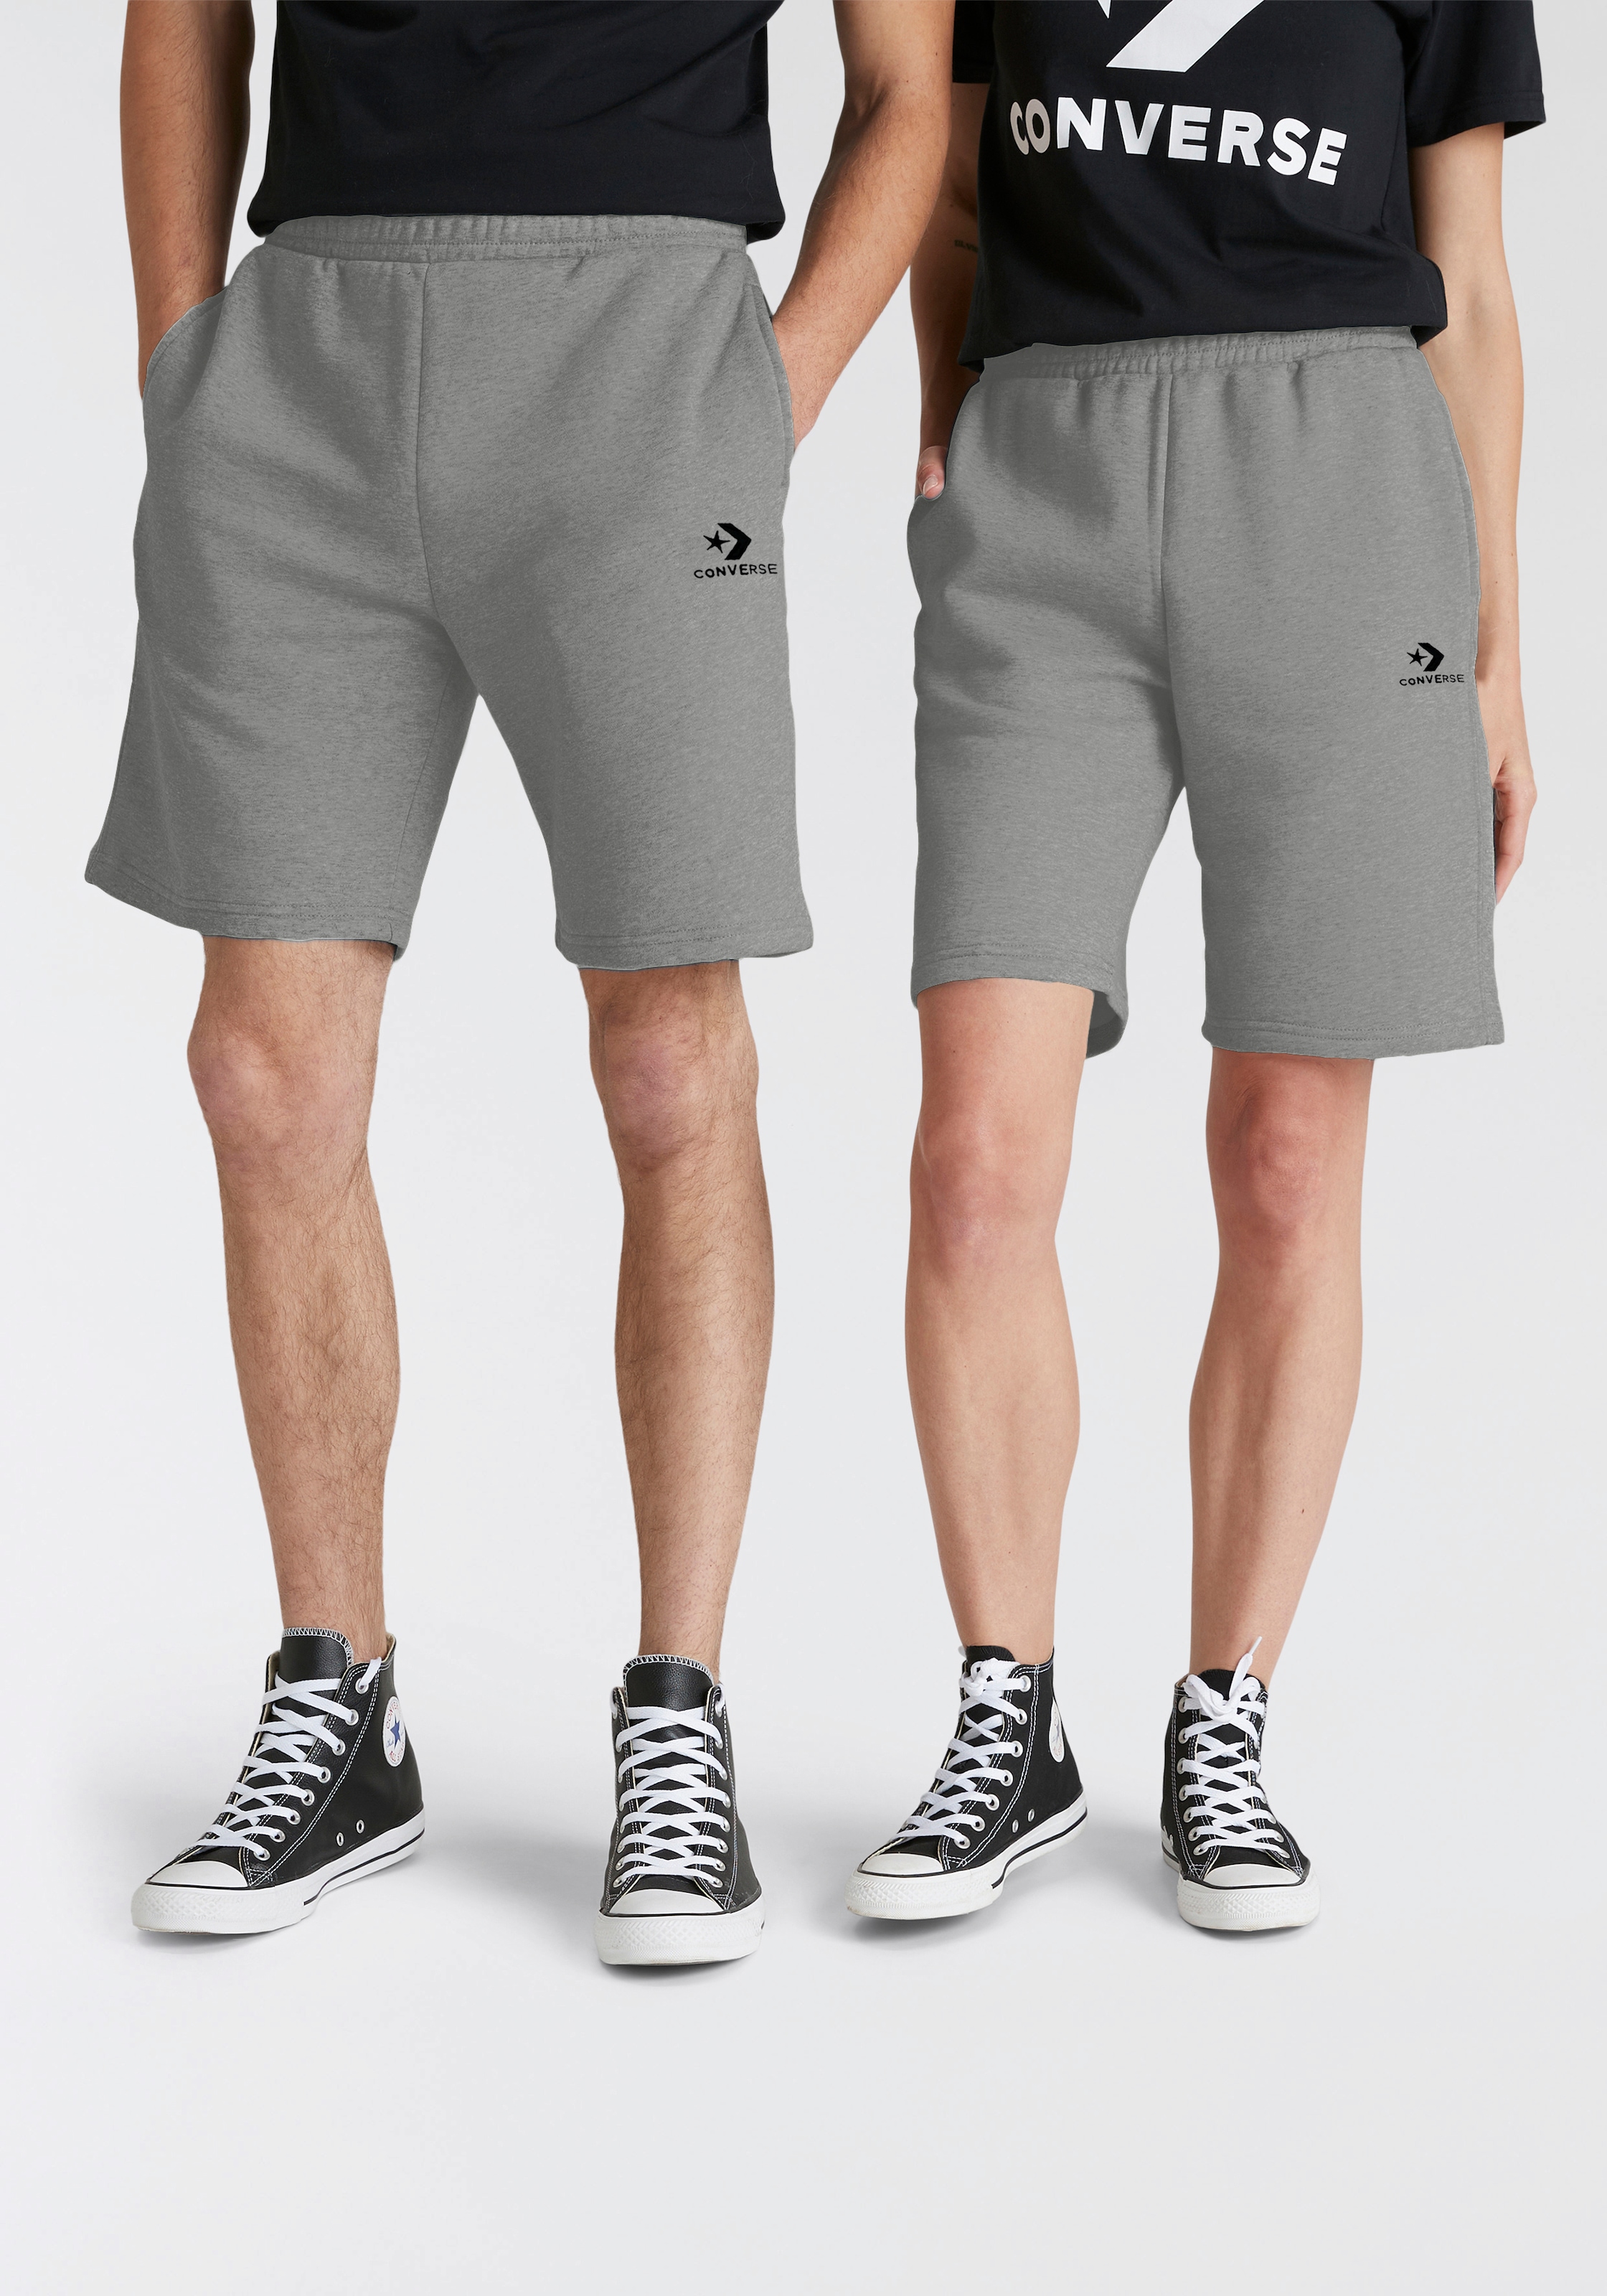 »CONVERSE Sweatshorts STAR Converse CHE«, EMBROIDERED bei GO-TO (1 ♕ tlg.)